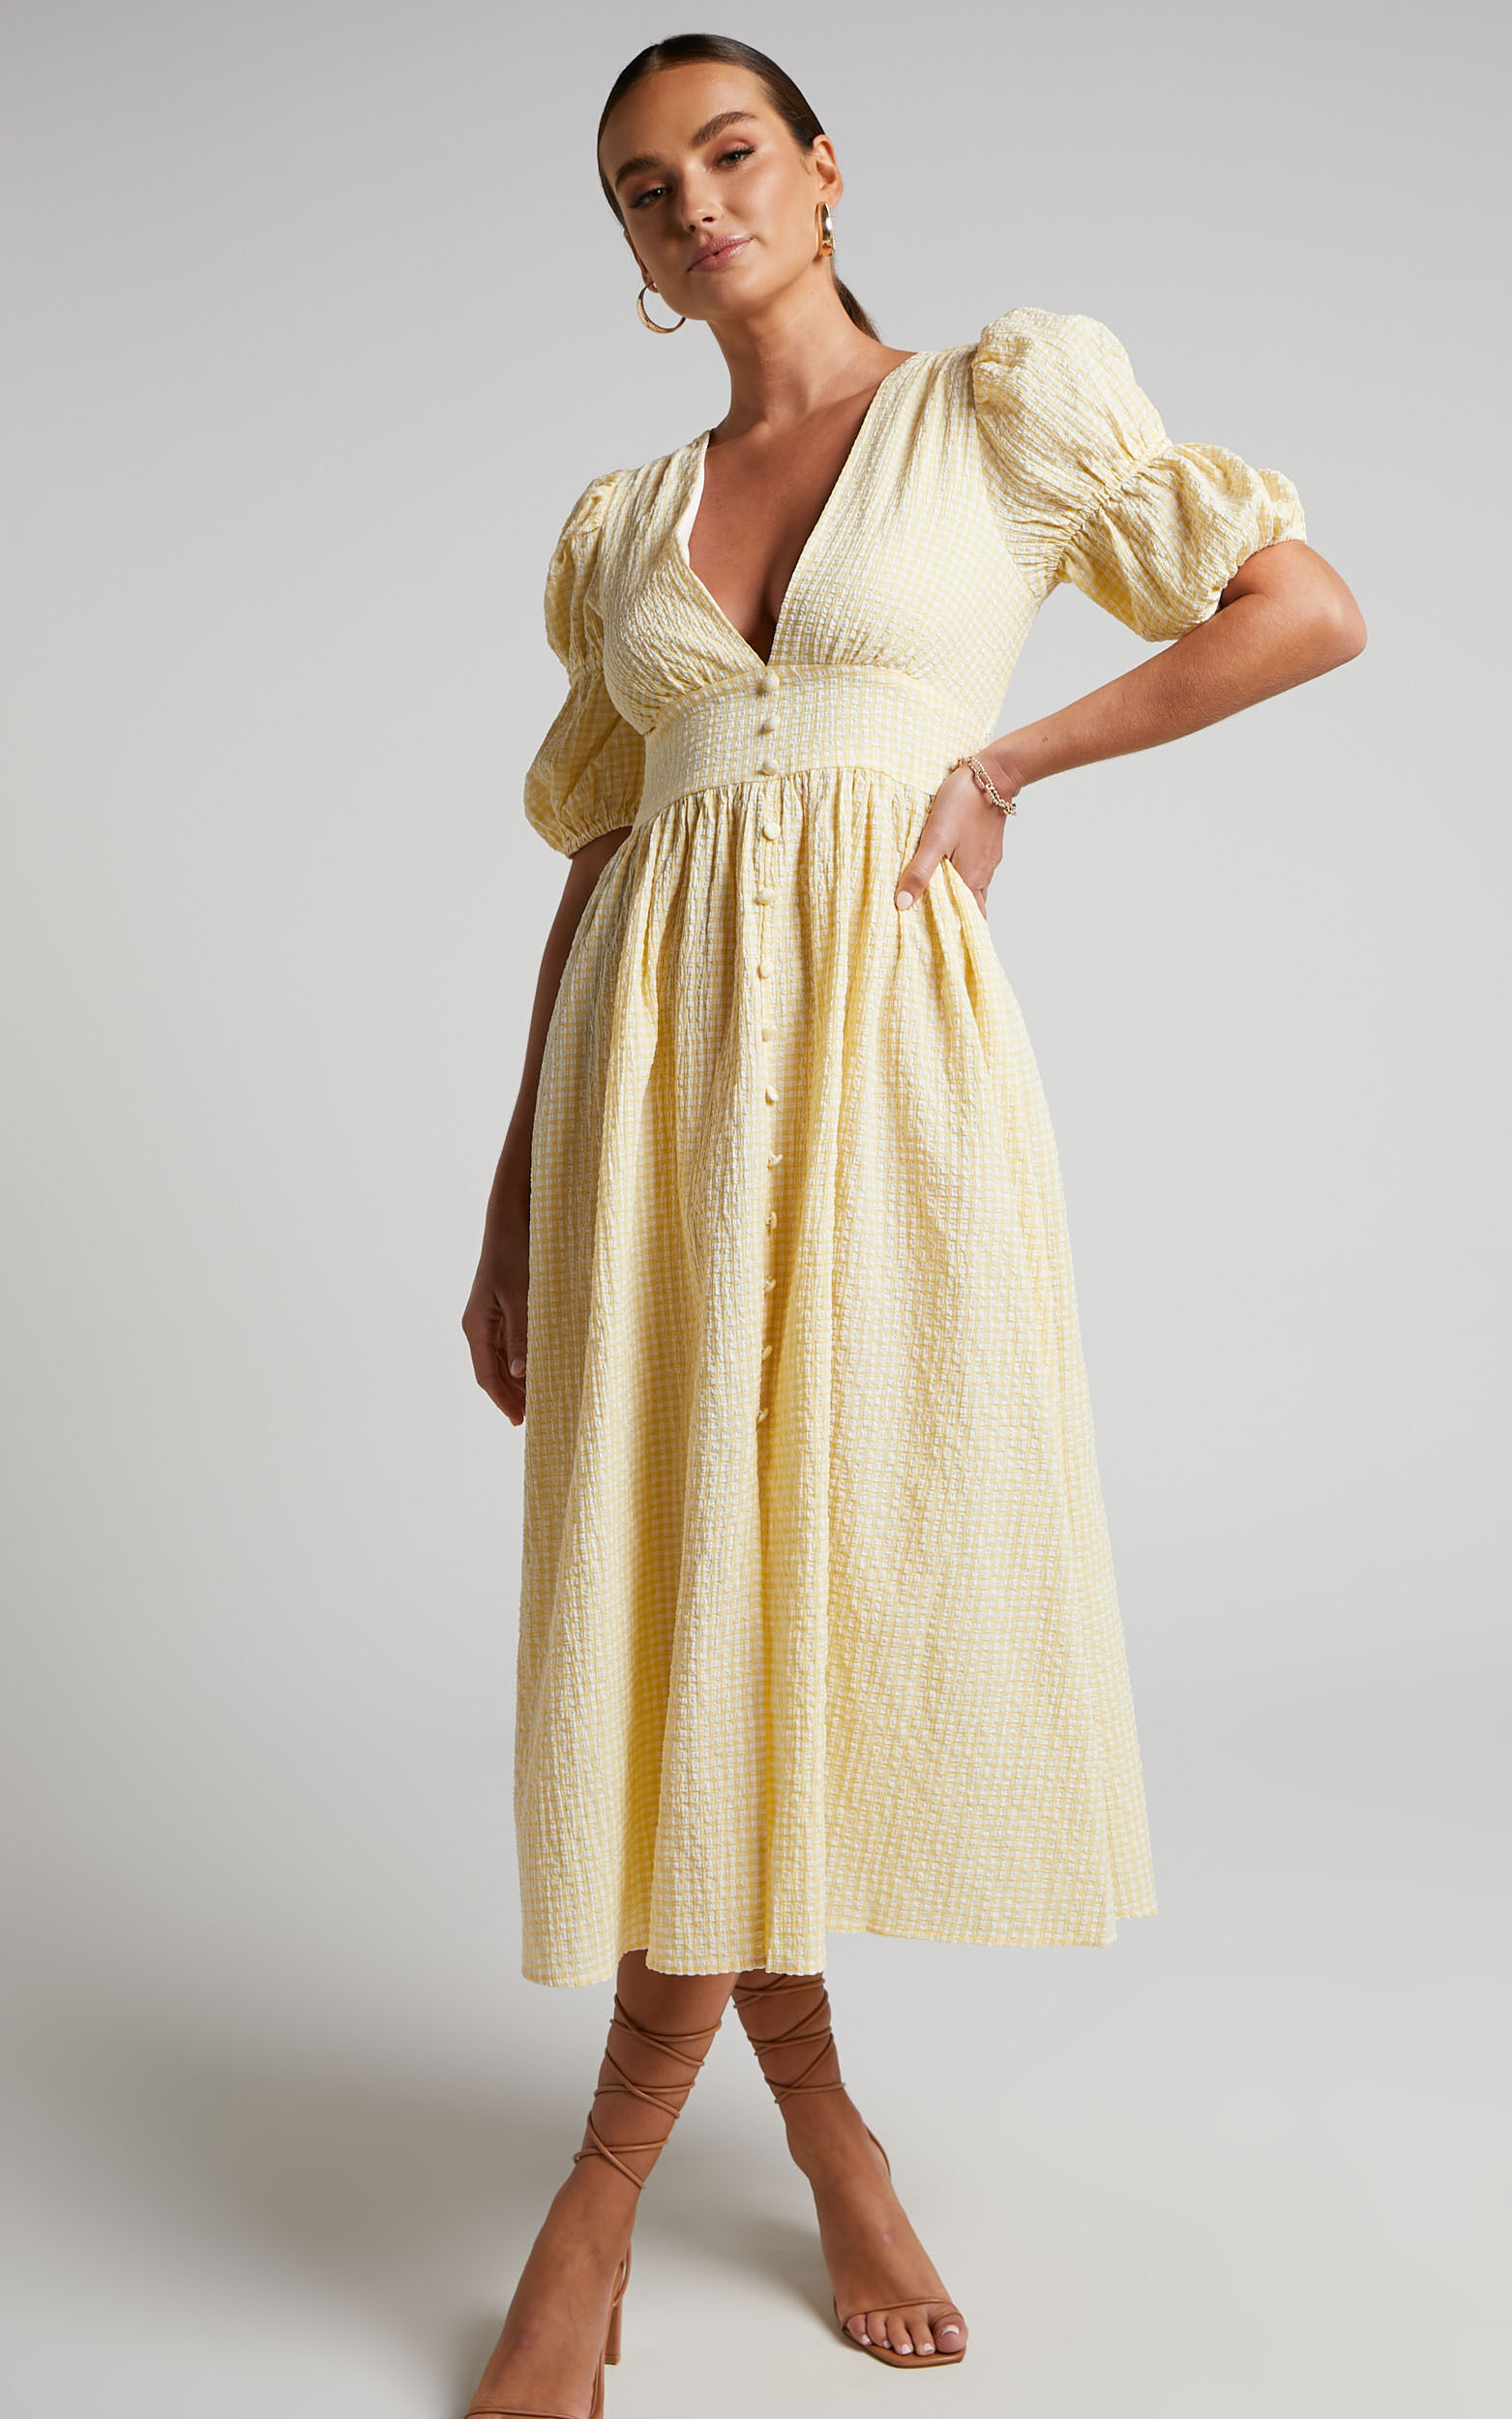 Augusta Midi Dress - Button Detail V Neck Double Puff Sleeve Dress in Butter Yellow - 04, YEL1